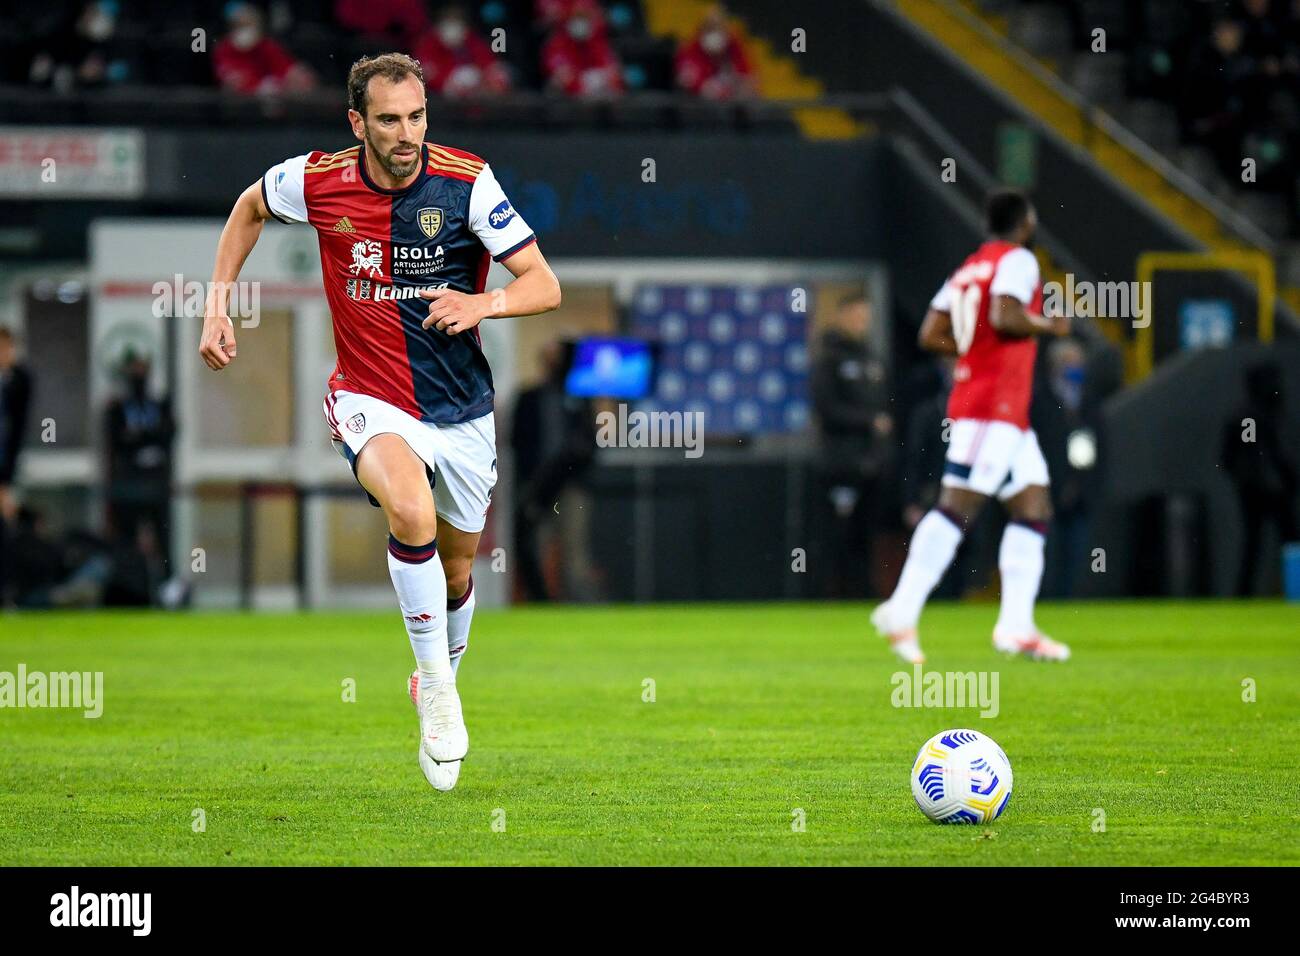 Udine, Italy. 01st June, 2021. Diego Godin (Cagliari) in action portrait during Cagliari Calcio season 2020/2021 (Archives), Italian football Serie A match in Udine, Italy, June 01 2021 Credit: Independent Photo Agency/Alamy Live News Stock Photo